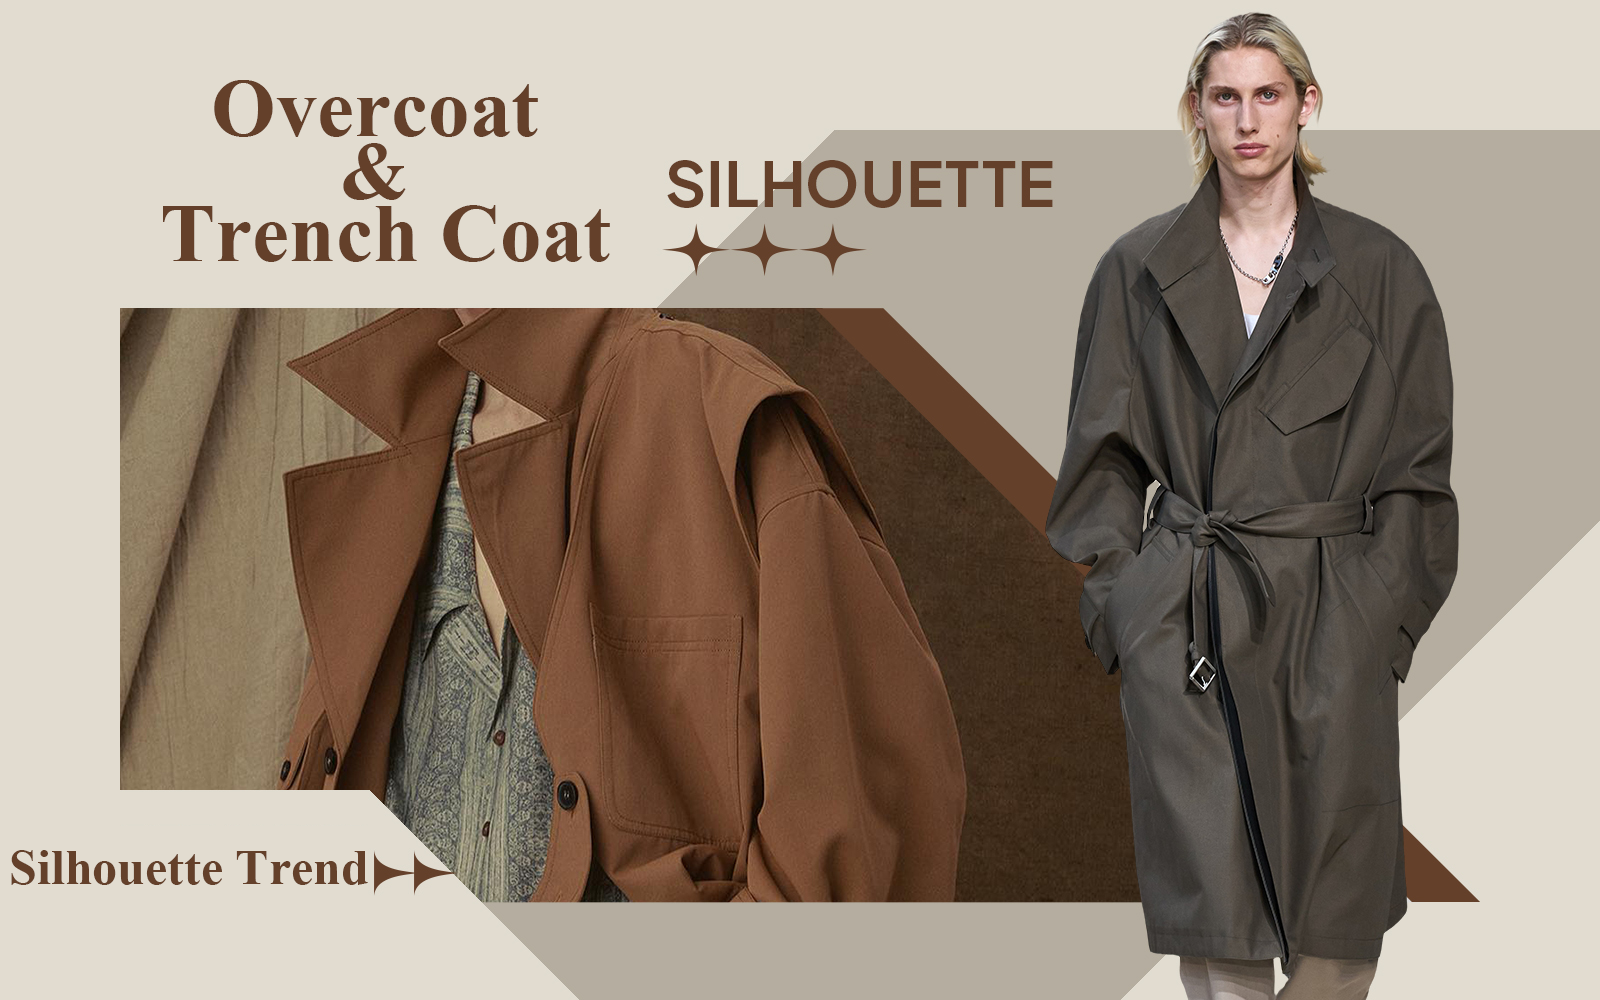 Urban Casual -- The Silhouette Trend for Men's Overcoat & Trench Coat